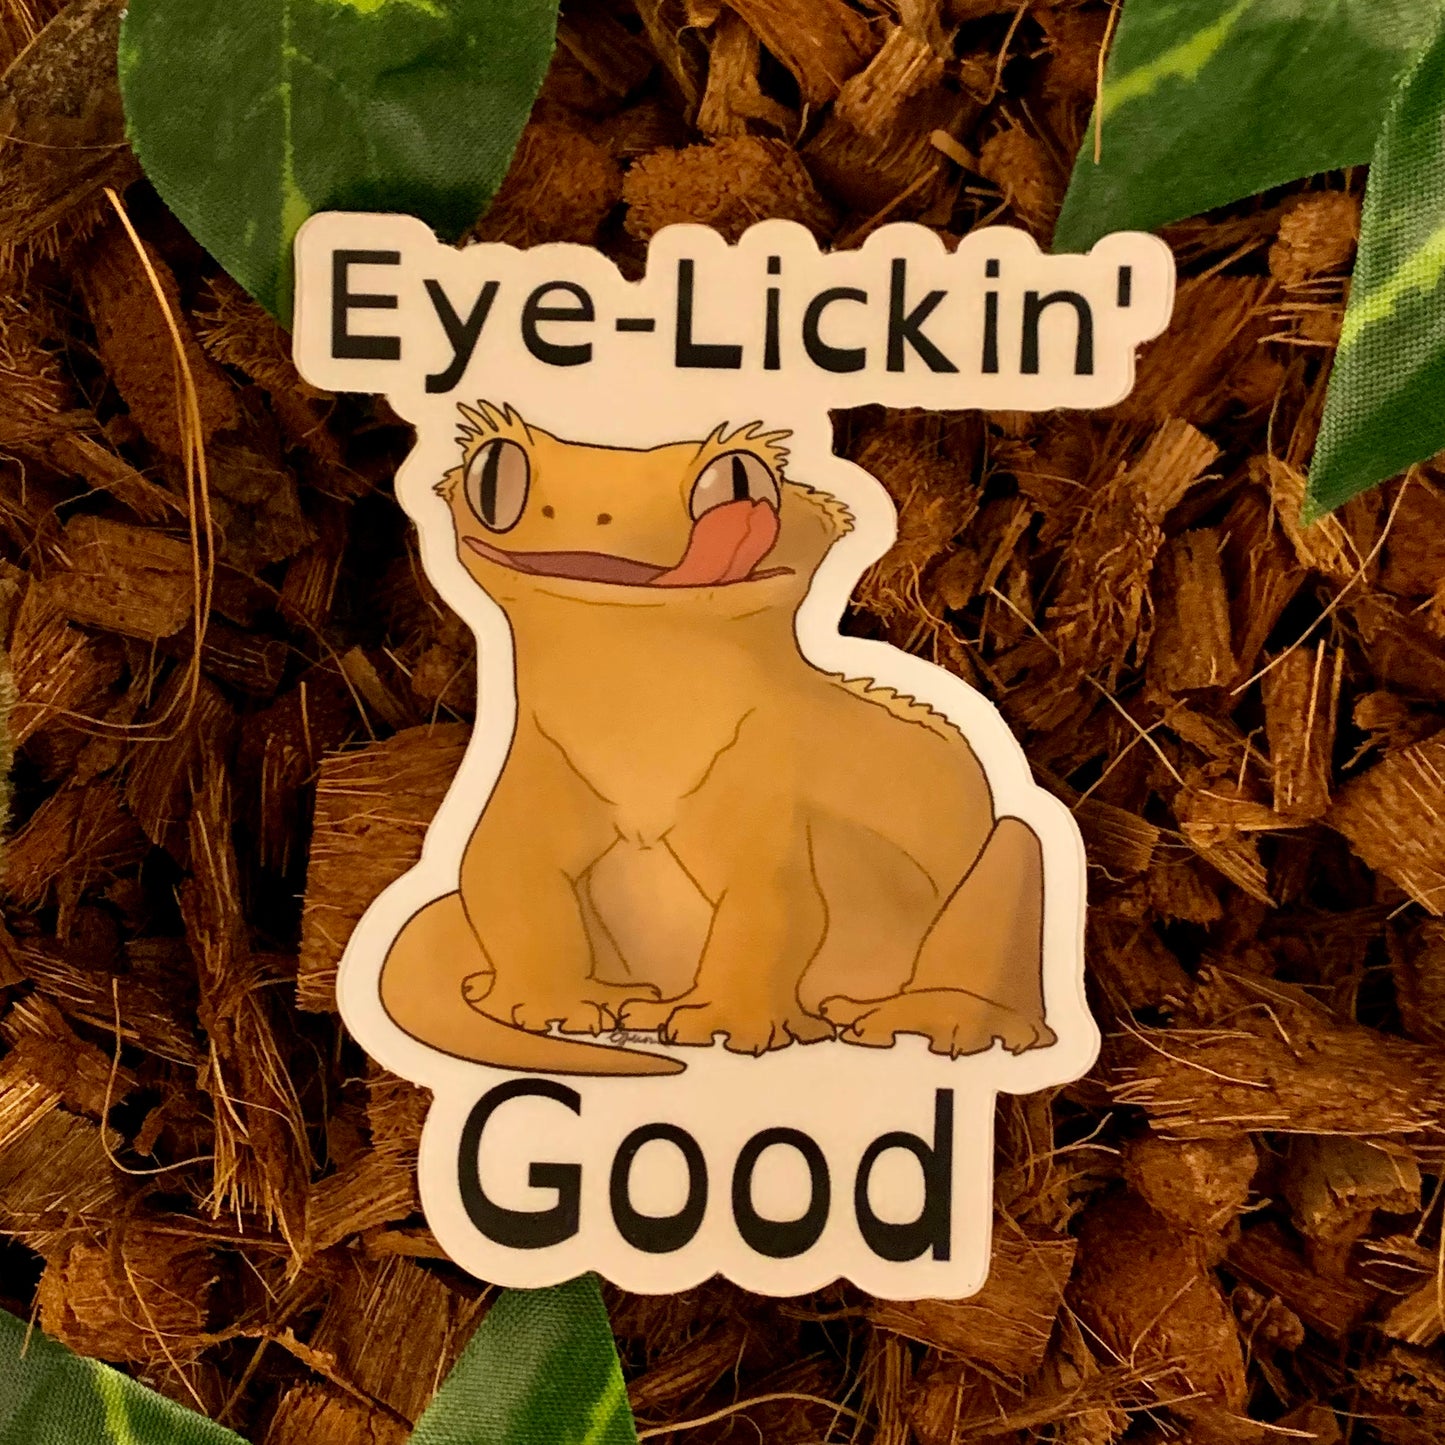 A three inch decal of a realistic cartoon style illustration of a crested gecko, sitting down, looking forward while licking one eye with the caption, "Eye Lickin' Good", the pun and the art are created by Amphisbaena Exotics